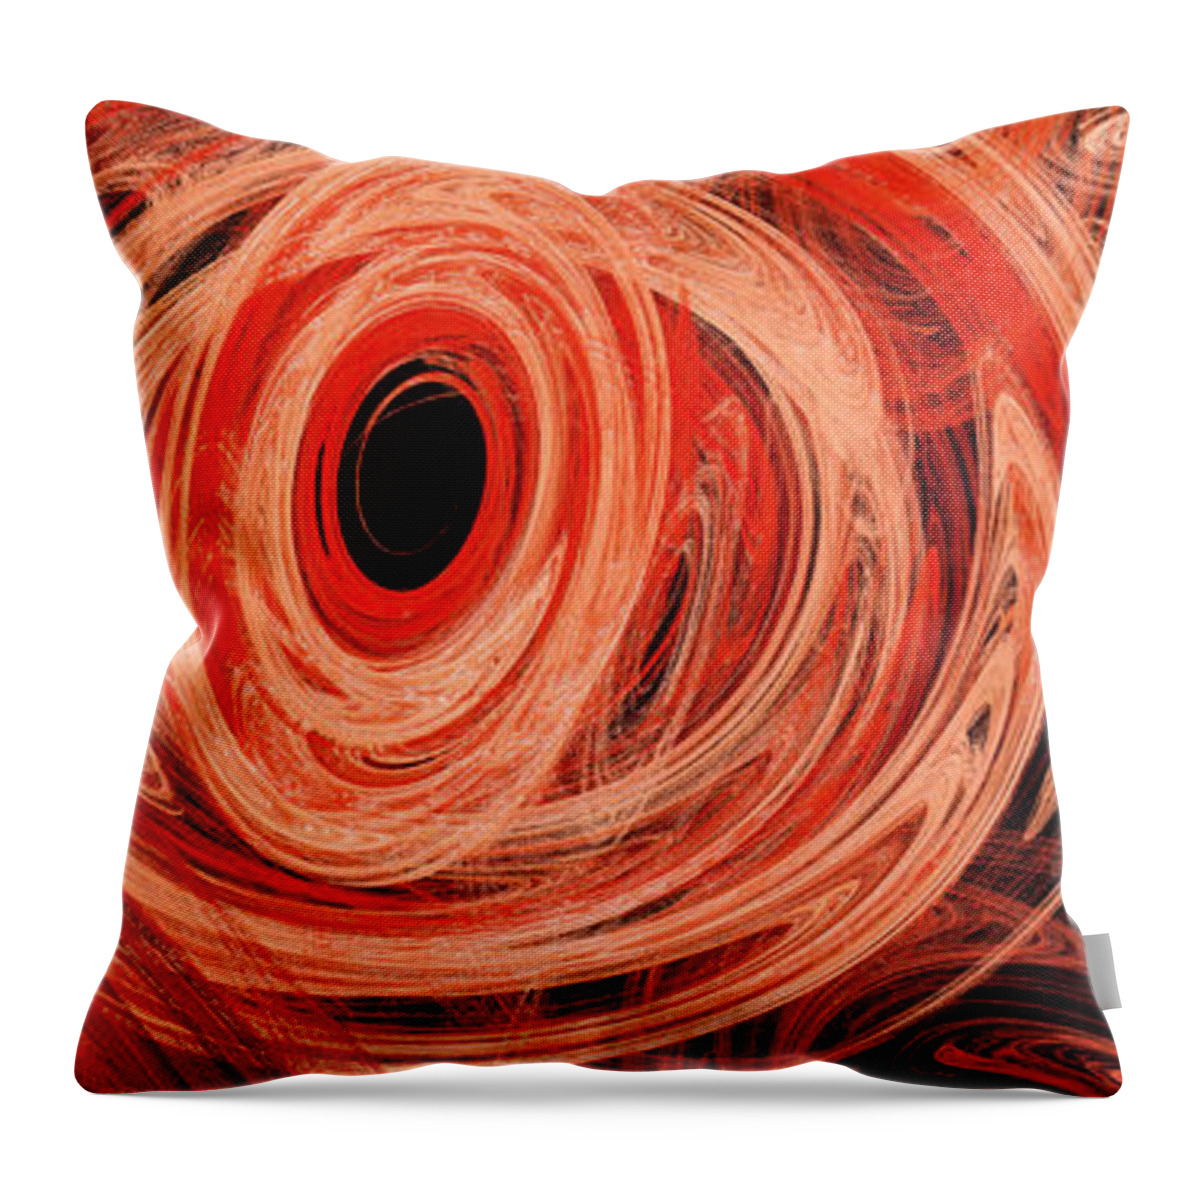 Andee Design Abstract Throw Pillow featuring the digital art Candy Chaos 2 Abstract by Andee Design